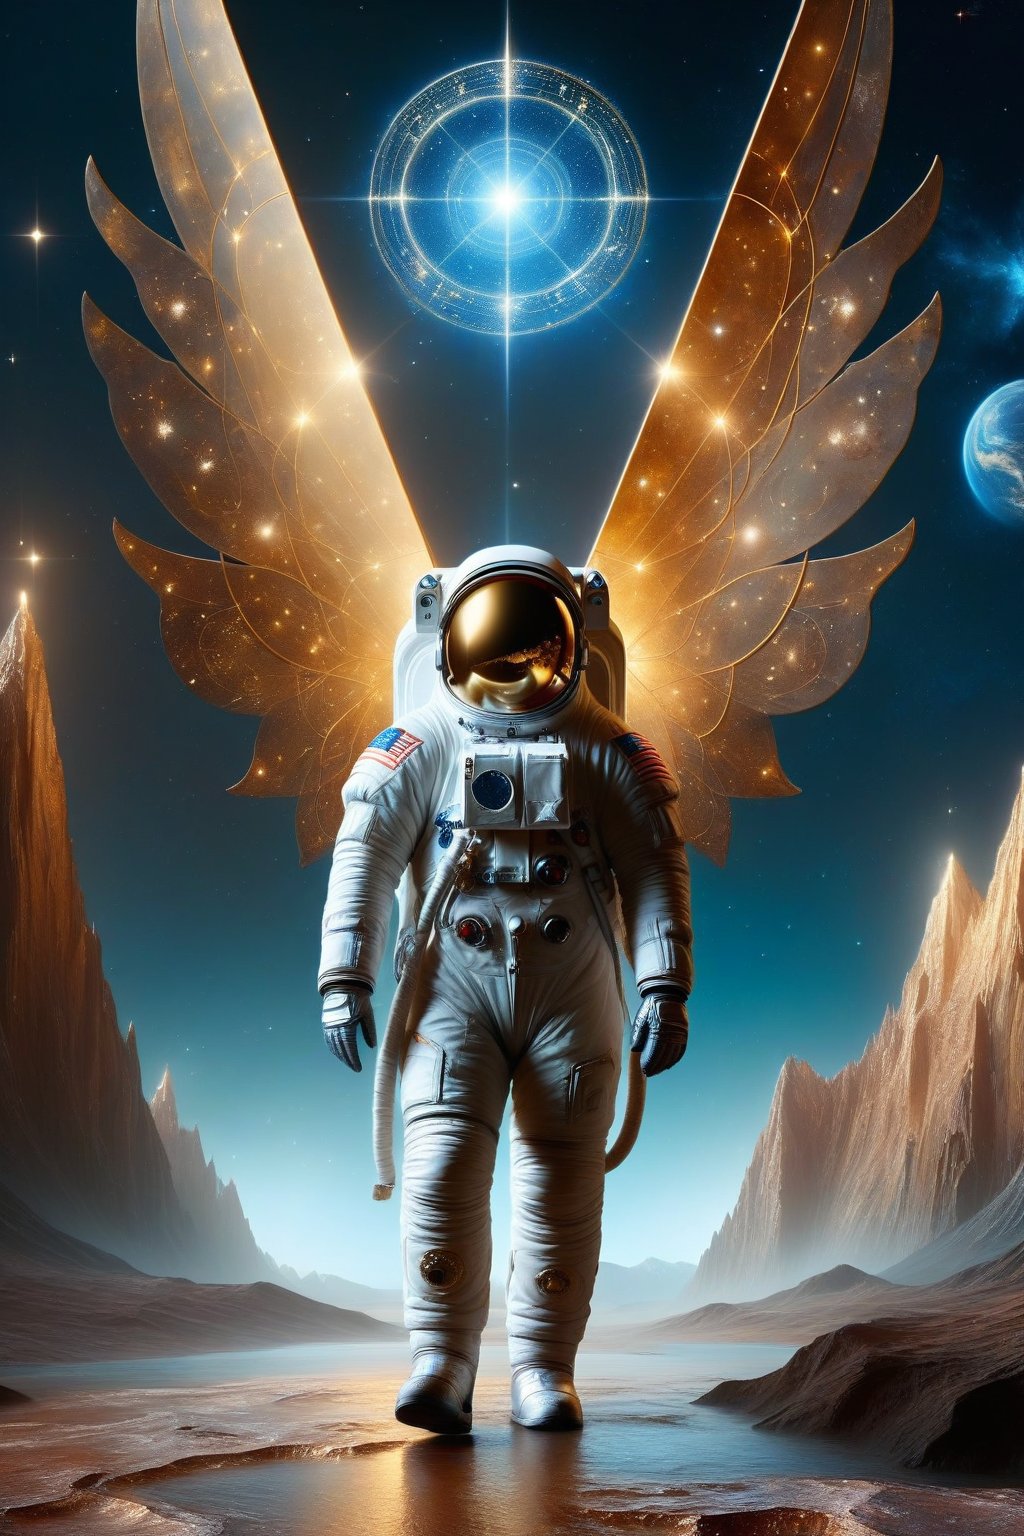 A Renaissance Lunar Landscape: An astronaut in period costume, with leather wings, walks gracefully across a lunar landscape painted in meticulous detail. The landscape is adorned with mountains reminiscent of Leonardo's compositions, with the Earth subtly glowing in the night sky. The deep crater resembles a mysterious depression and the iridescent crystal formations glow with an earthy, golden light. In the sky, a constellation shaped like a musical score intertwines with haloed stars in a celestial dance. The scene conveys a sense of harmony between science and art, capturing the essence of Renaissance exploration in a galactic context.,retro_rocket,futuristic, metal adorning,hollow inside,DonM0ccul7Ru57XL,tranzp